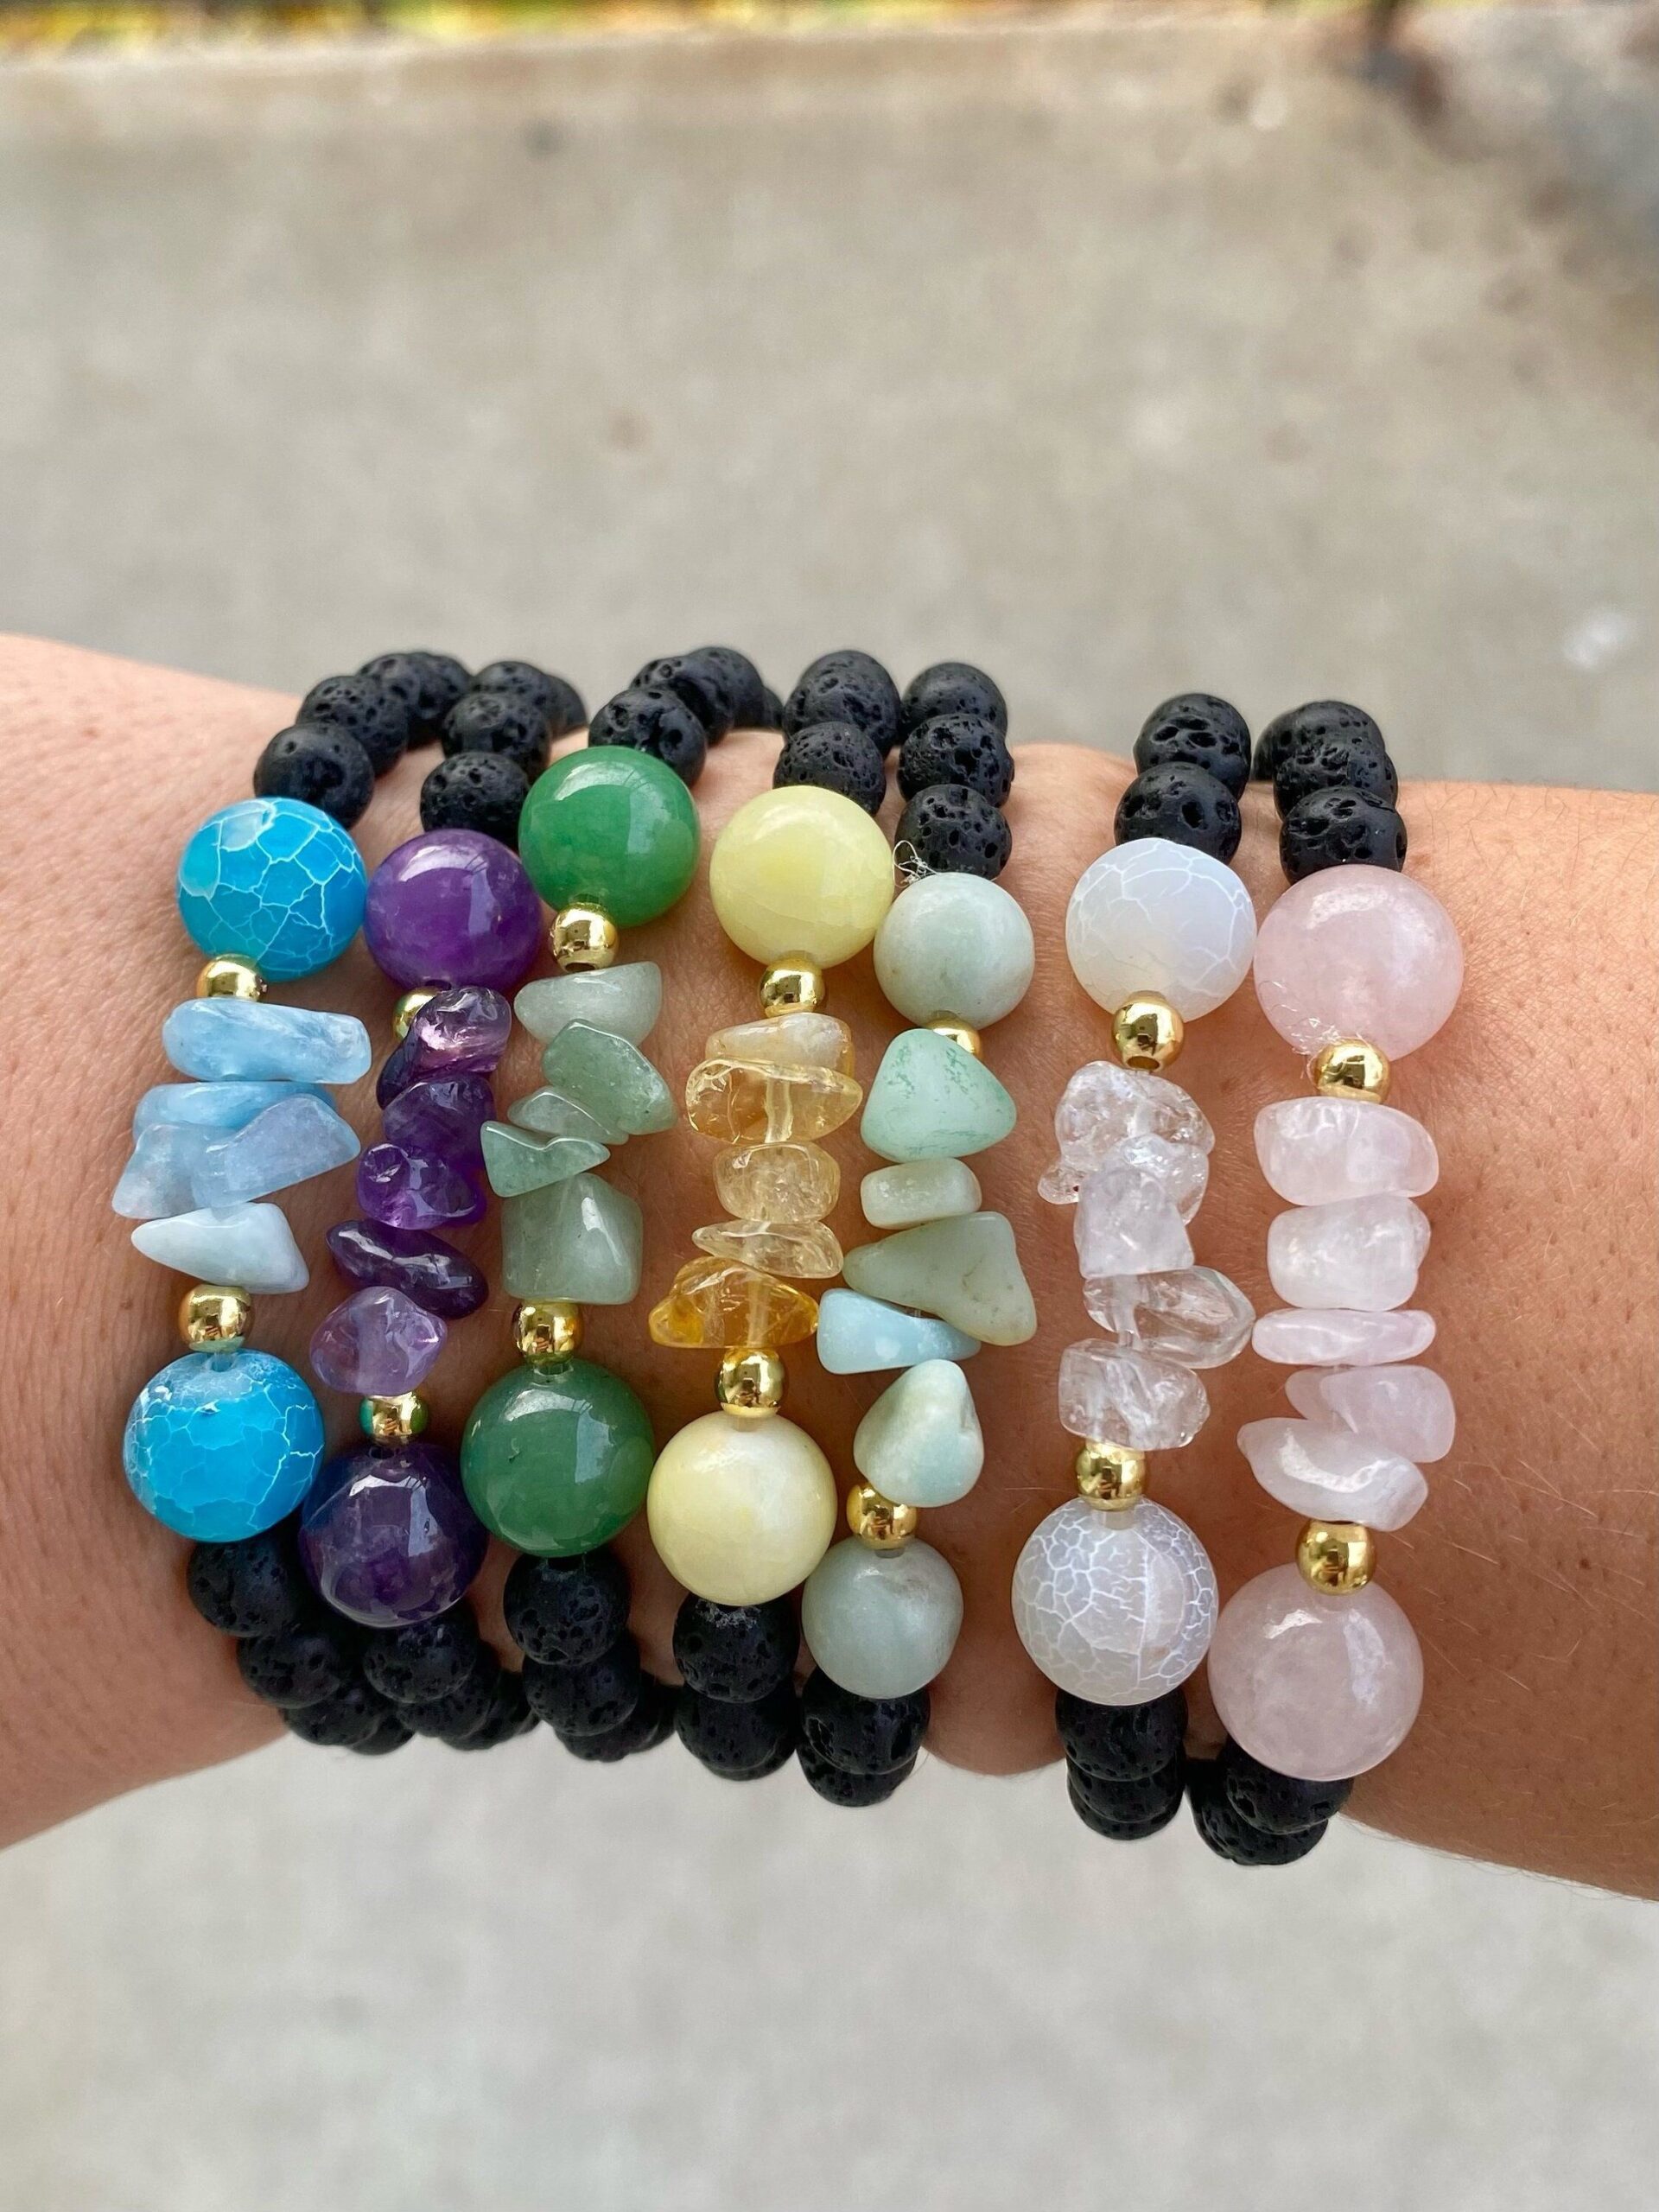 The Power of Gemstone Bracelets: How
Crystals Can Improve Your Life